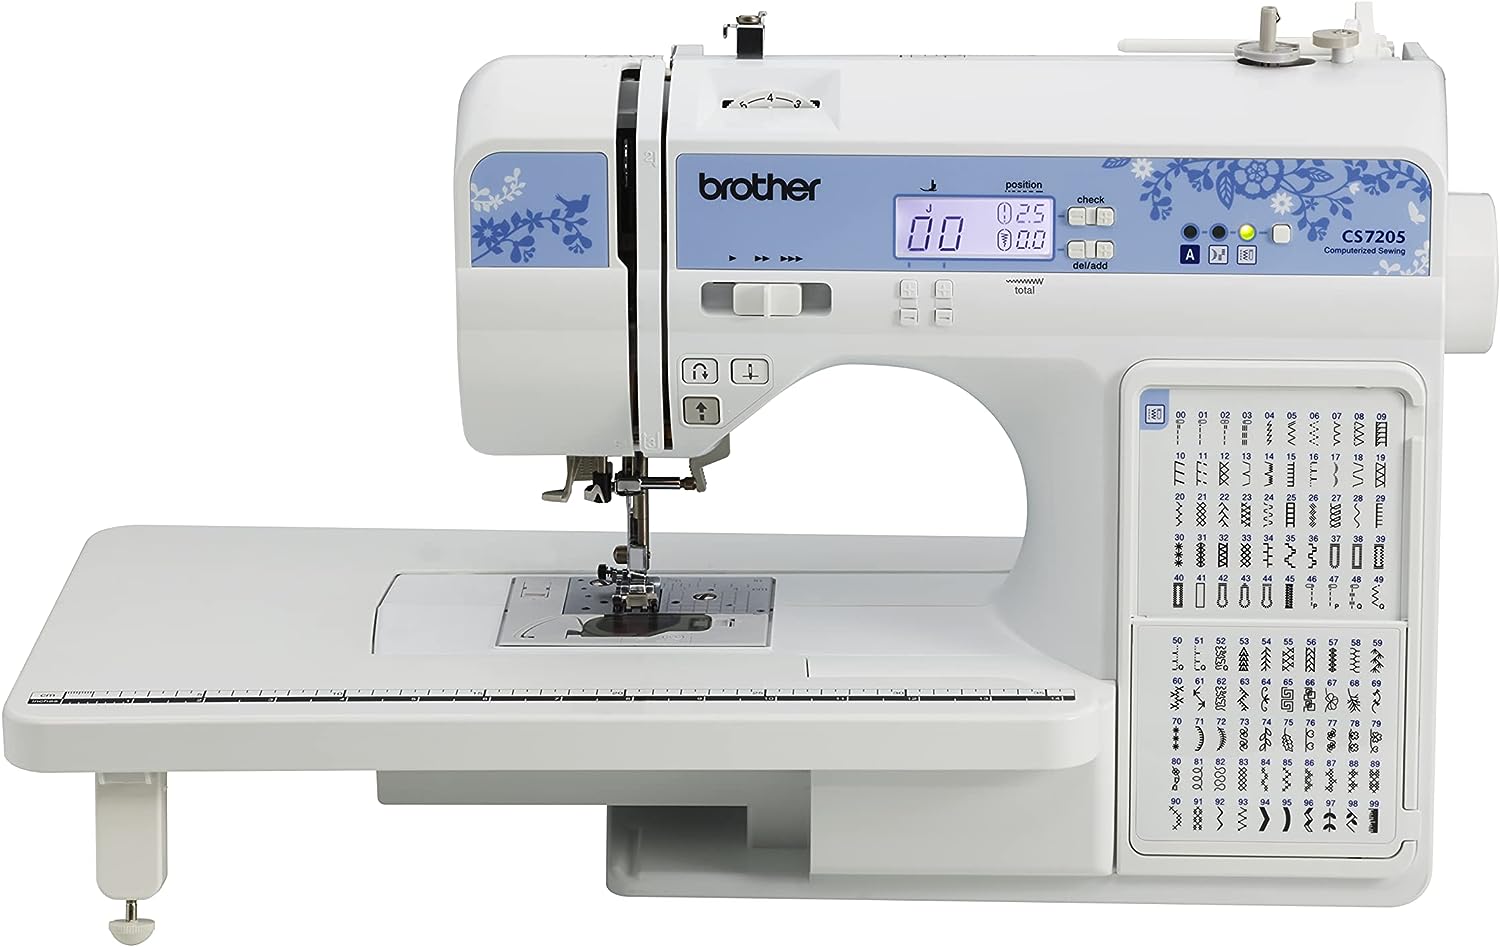 Brother CS7205 COMPUTERIZED Sewing machine